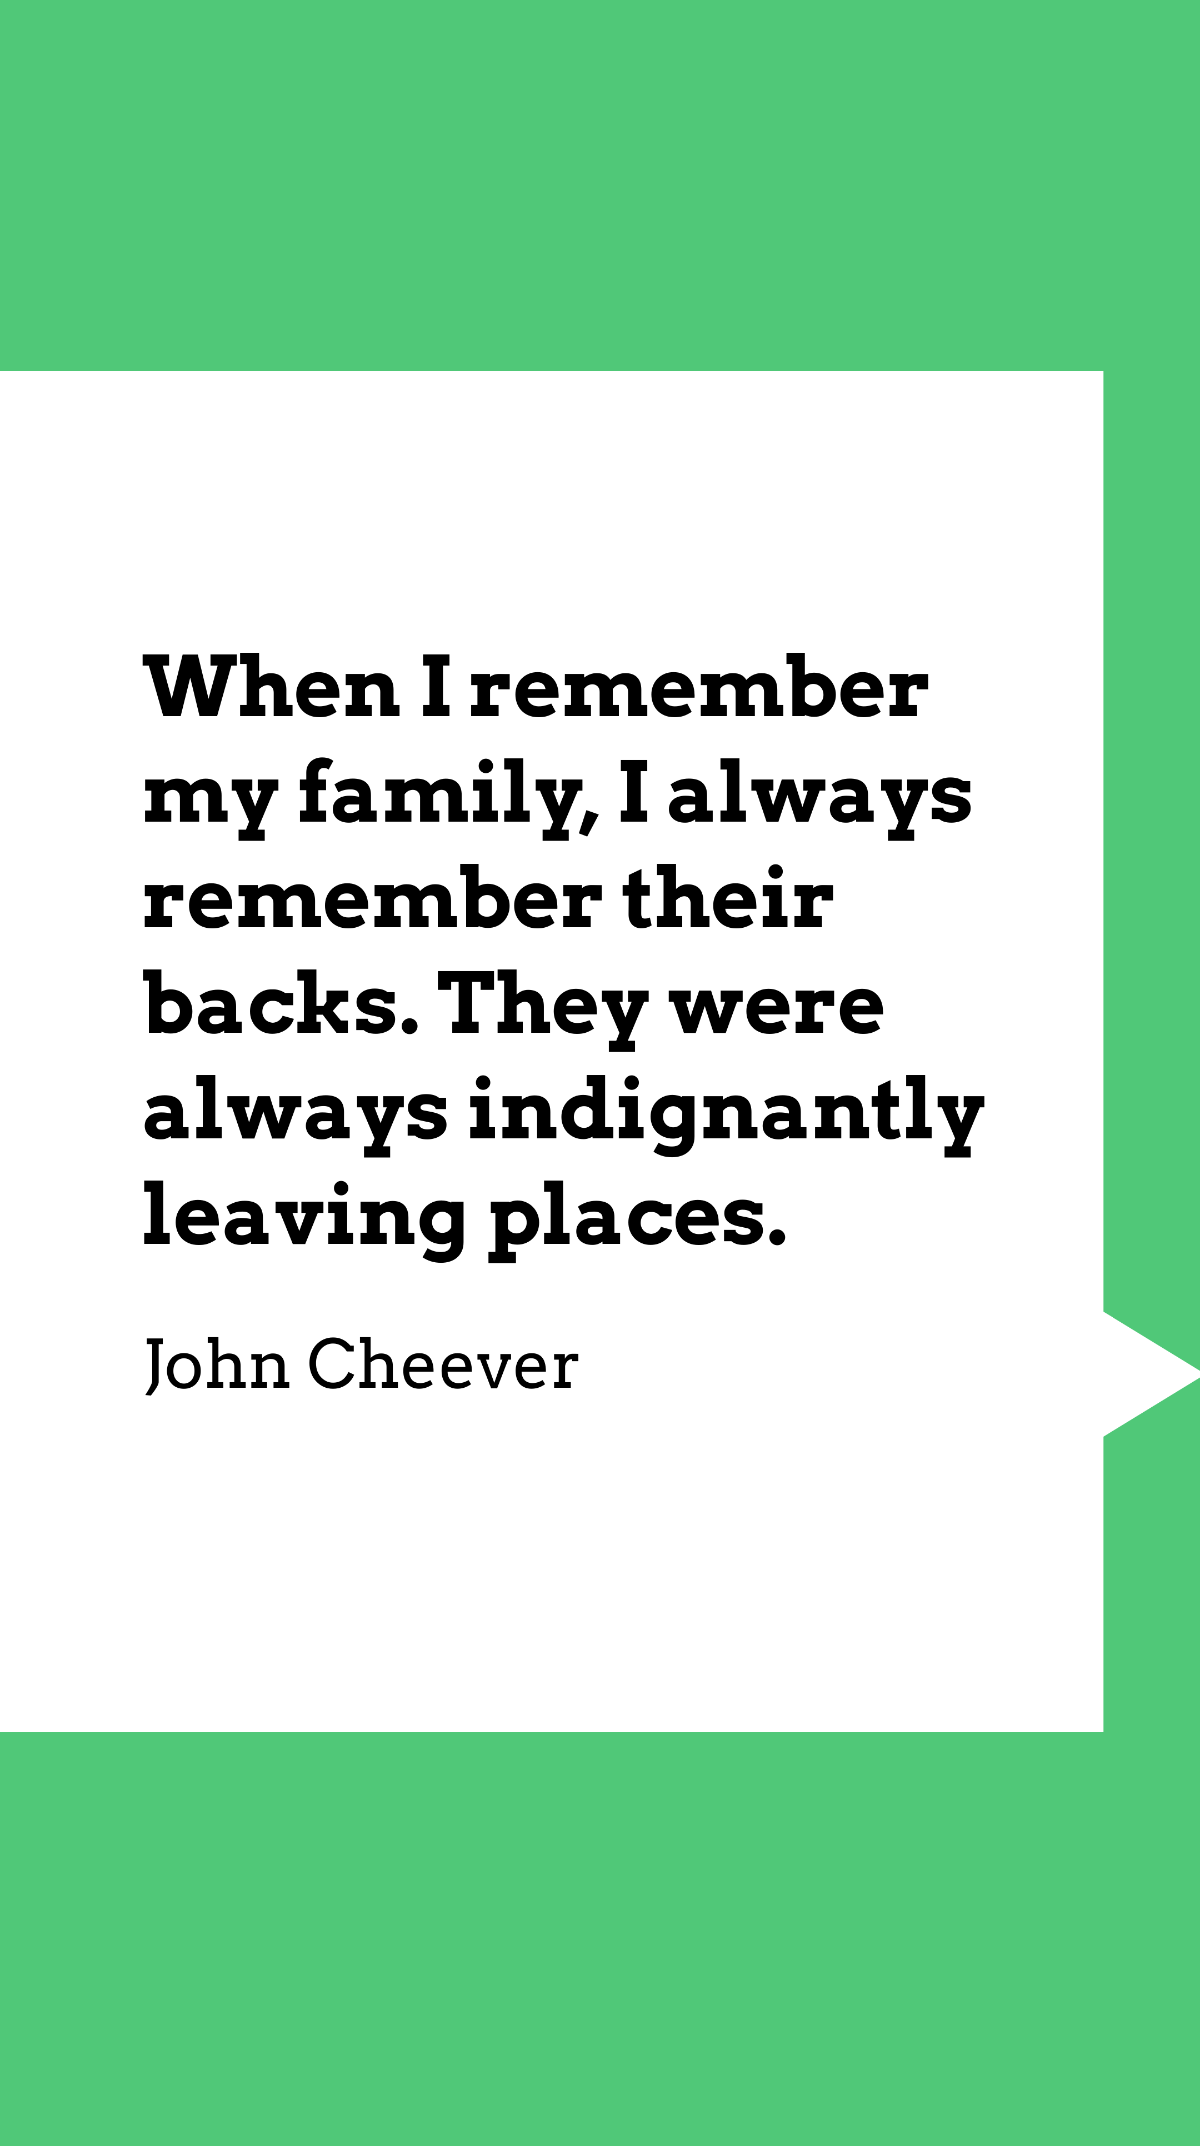 John Cheever - When I remember my family, I always remember their backs. They were always indignantly leaving places.